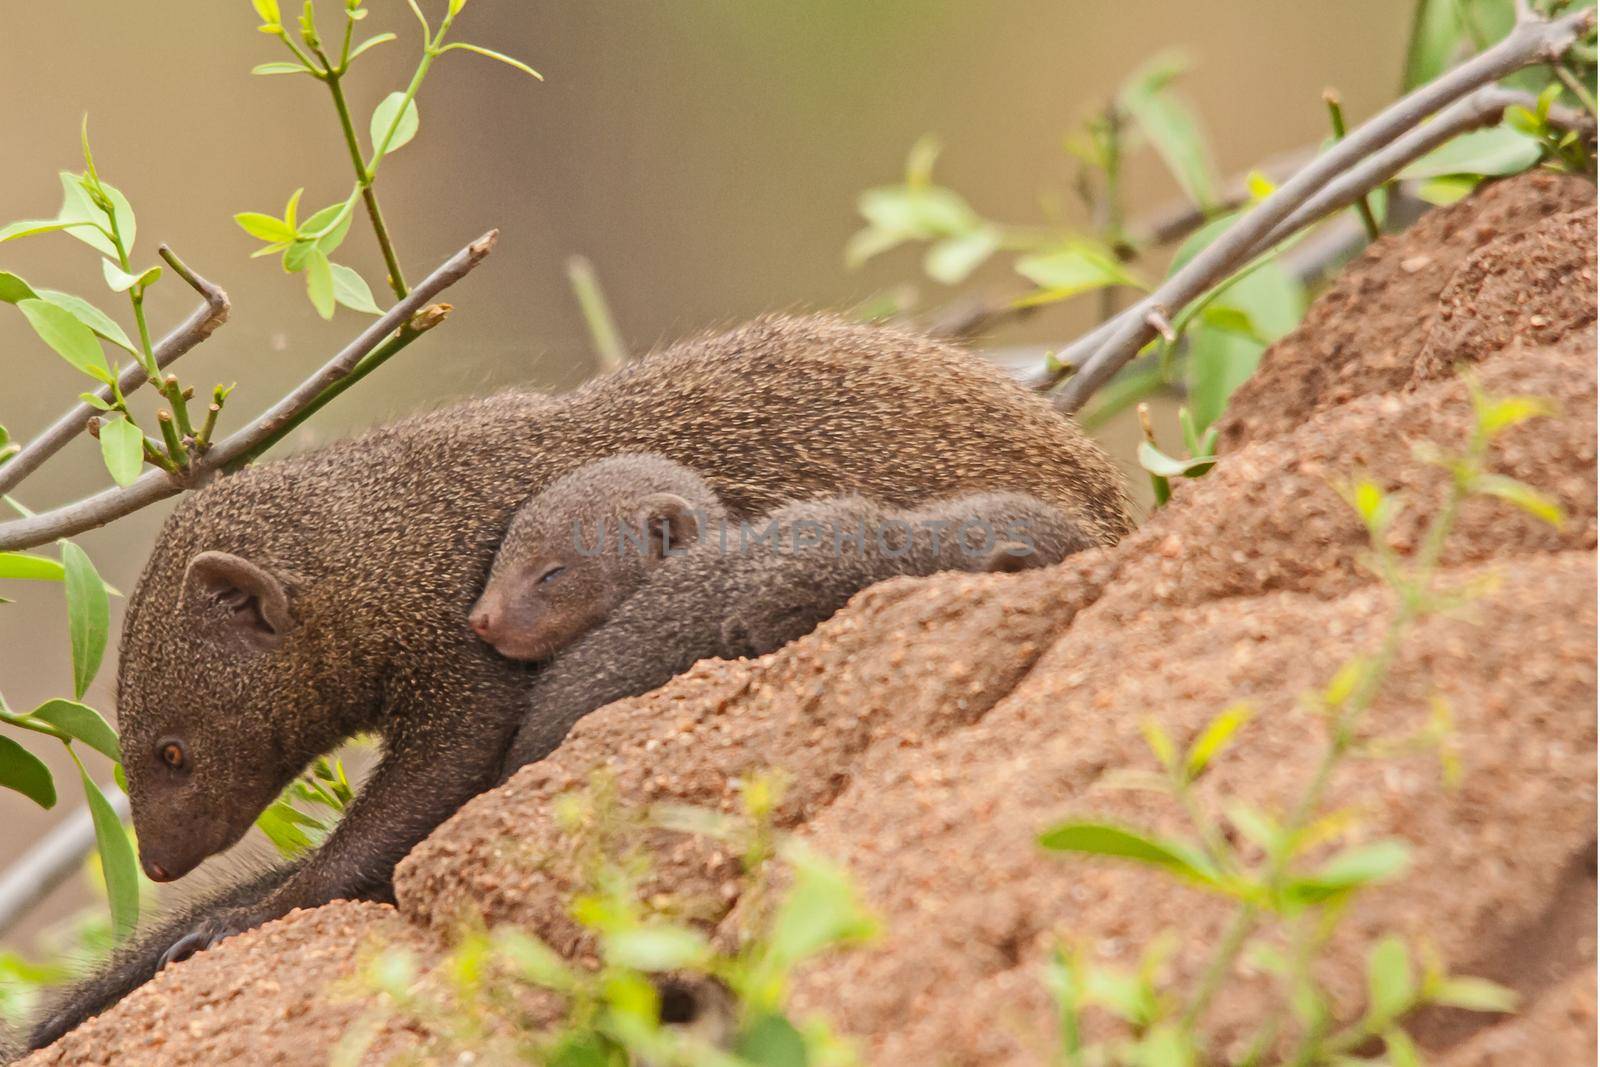 Dwarf Mongoose (Helogale parvula) mother with sleeping baby 13815 by kobus_peche